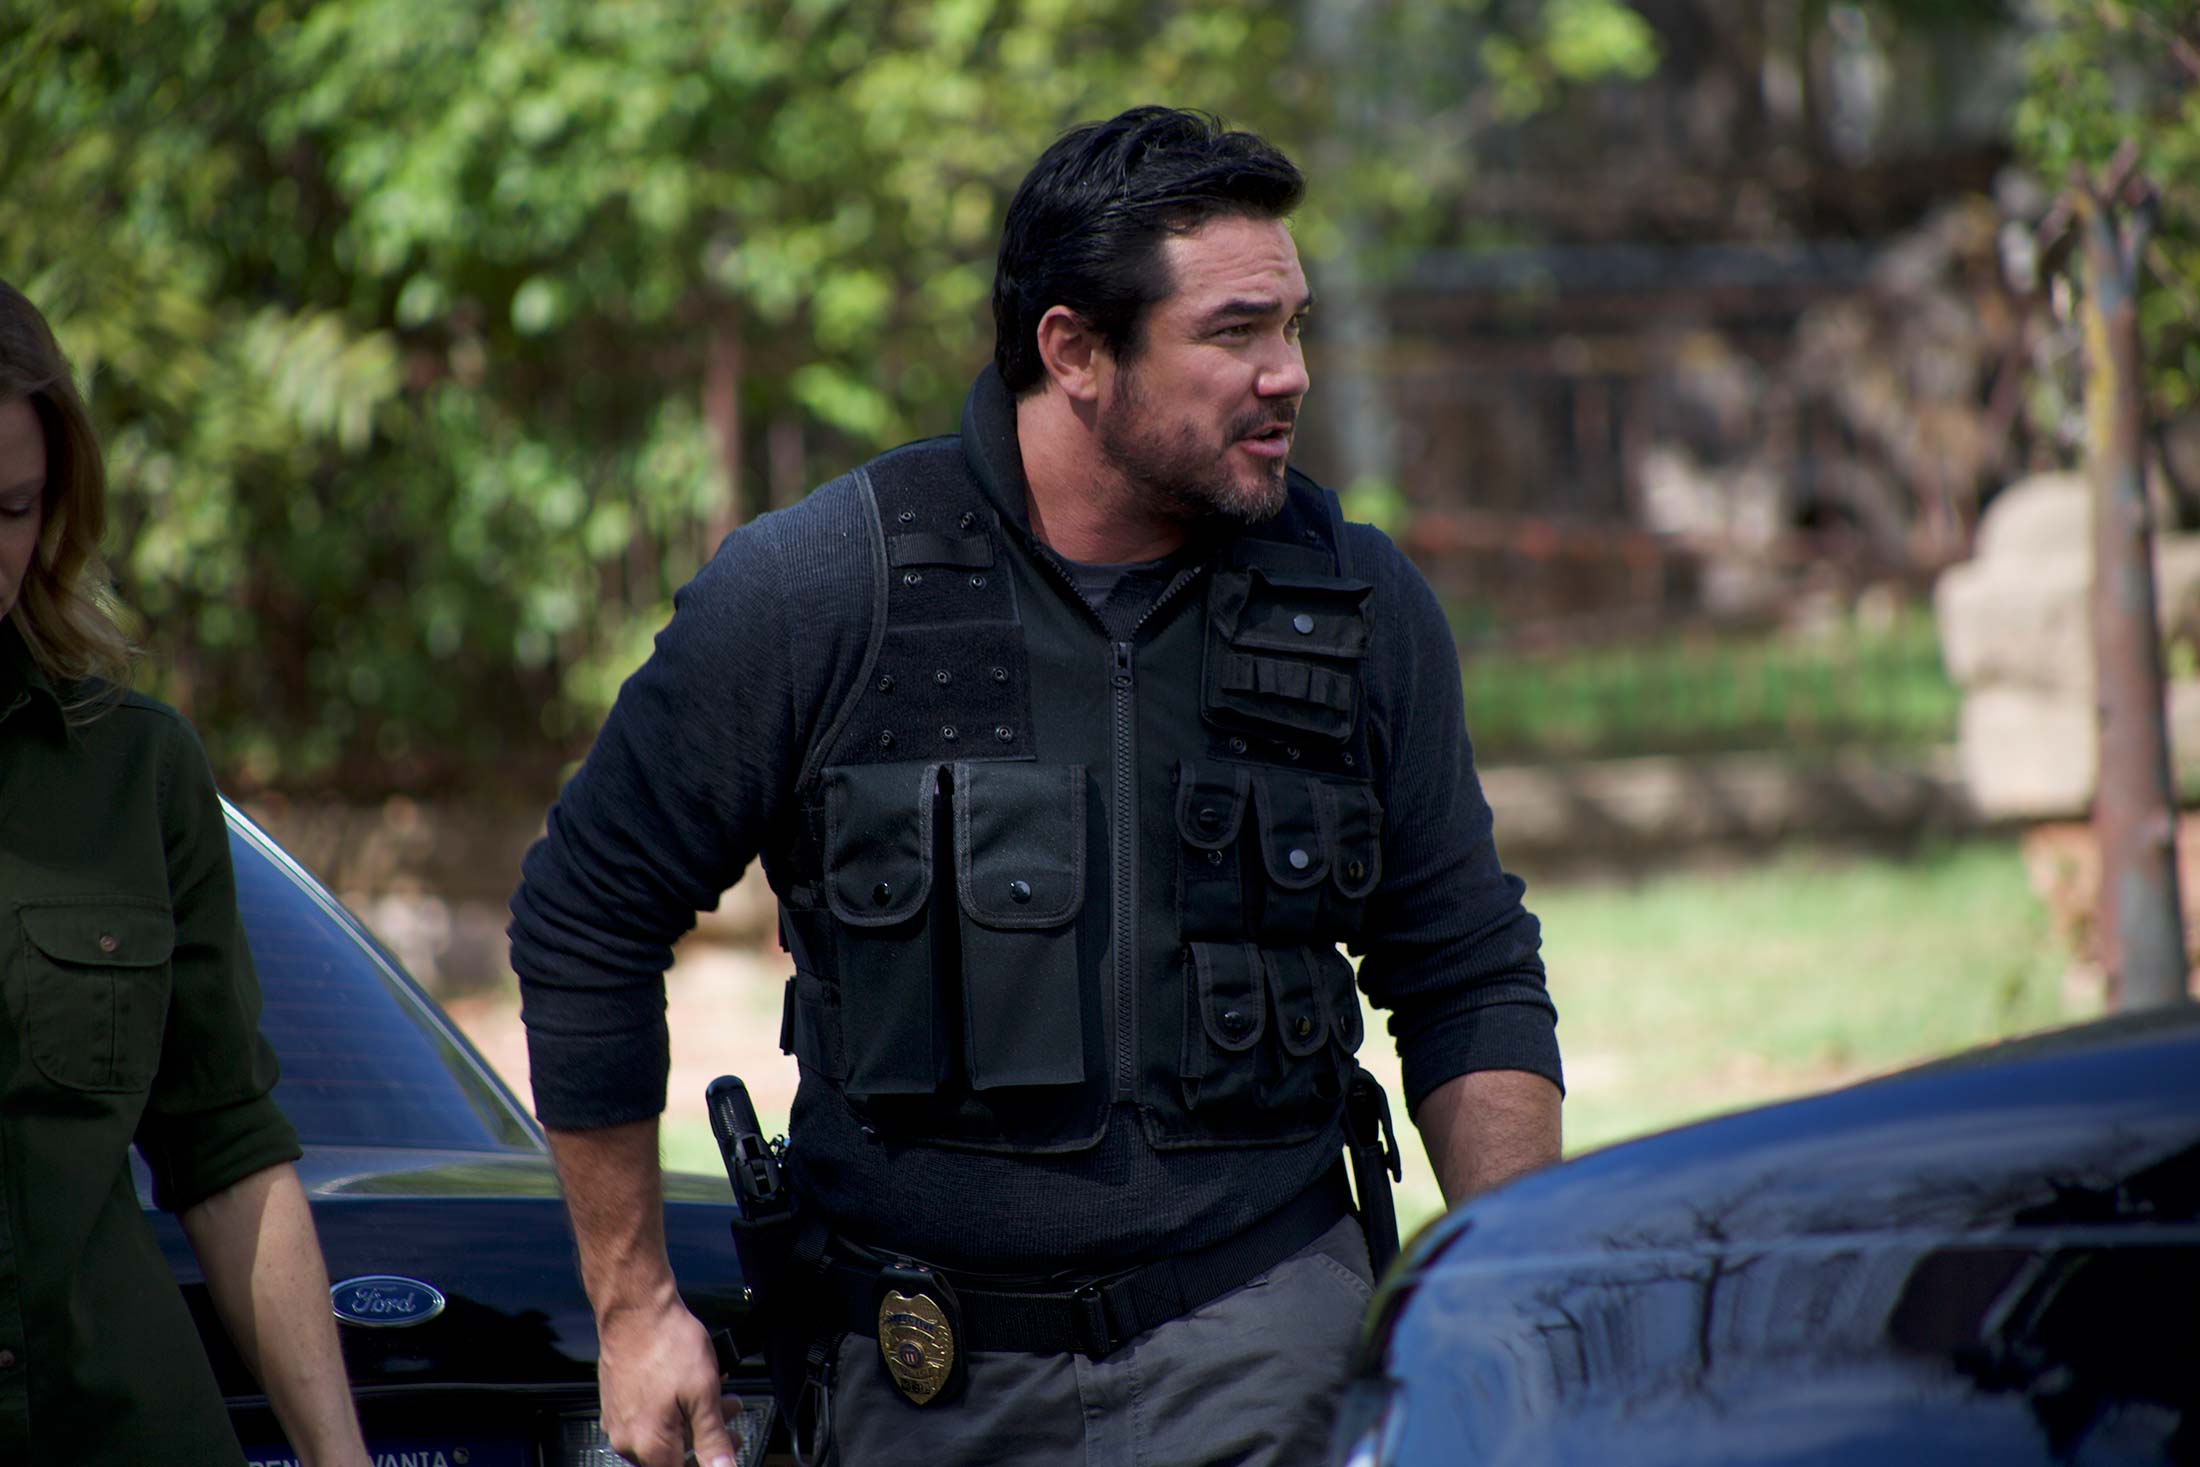 Dean Cain in a tactical police vest in a still from the movie.